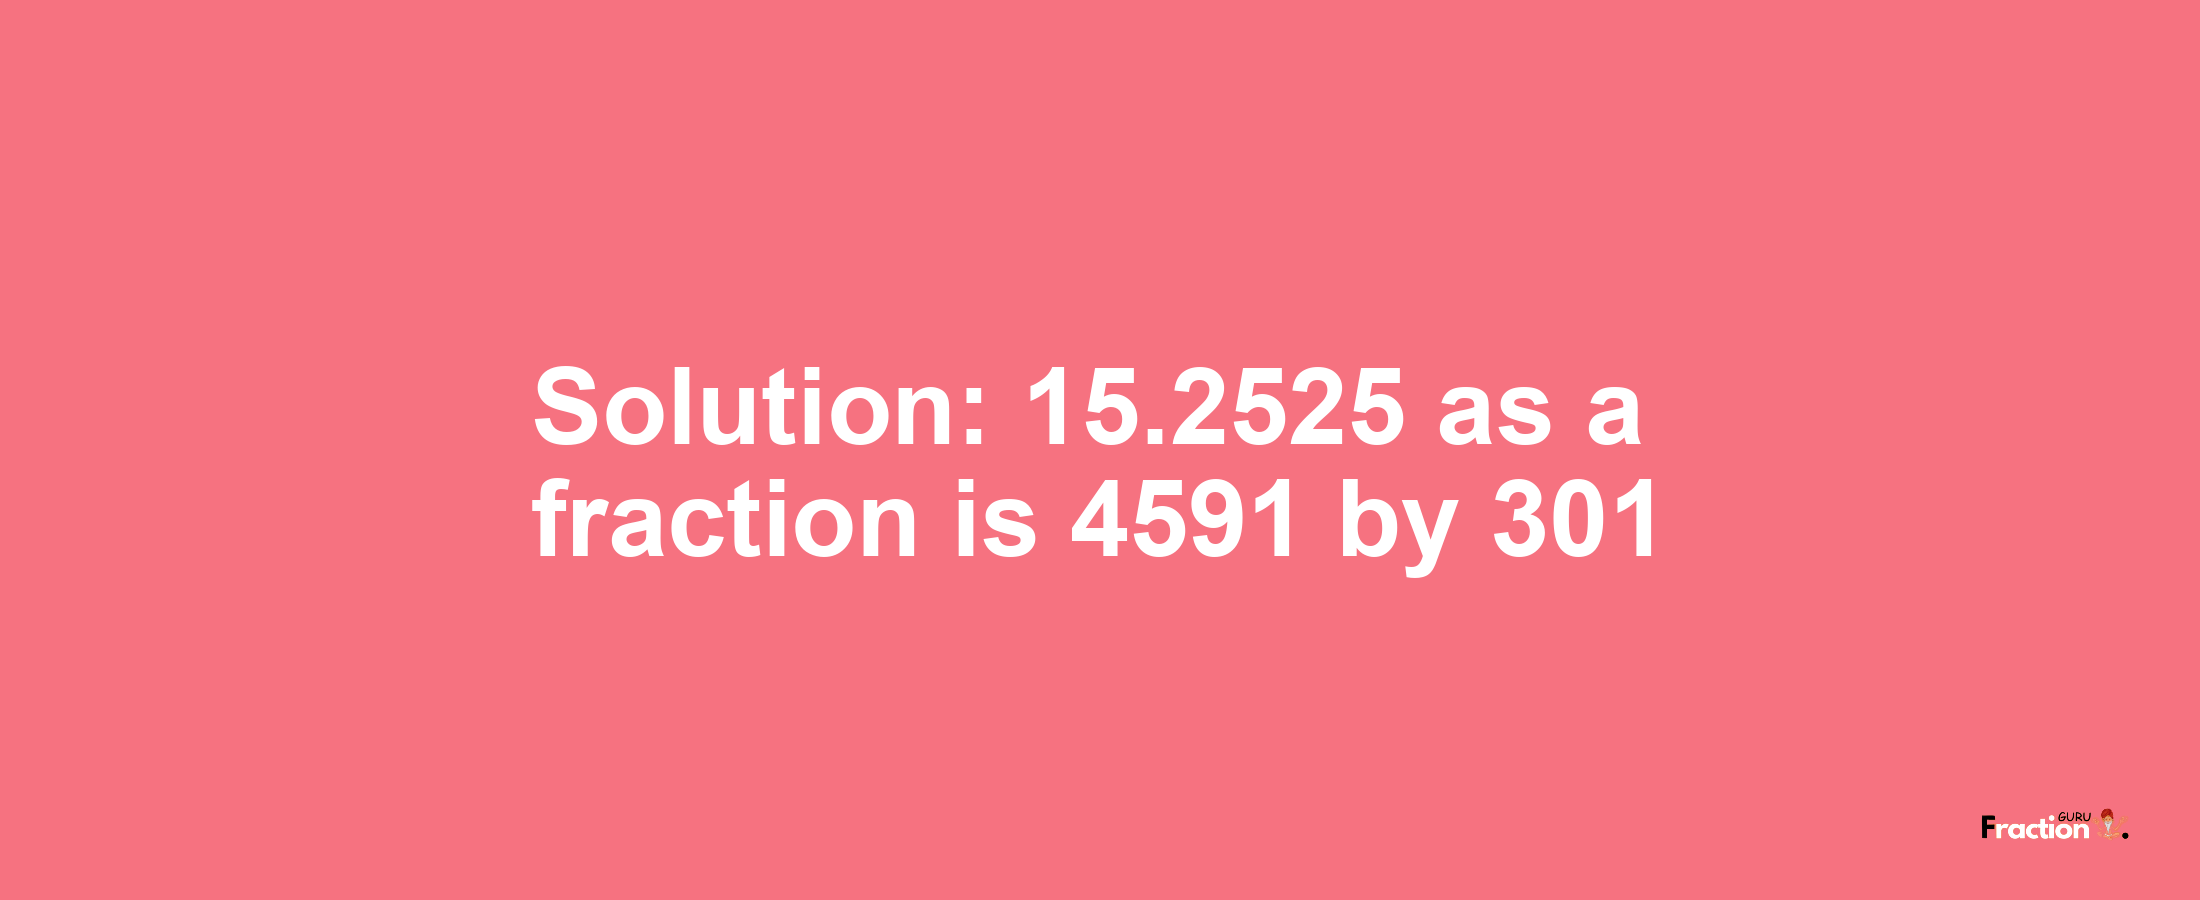 Solution:15.2525 as a fraction is 4591/301